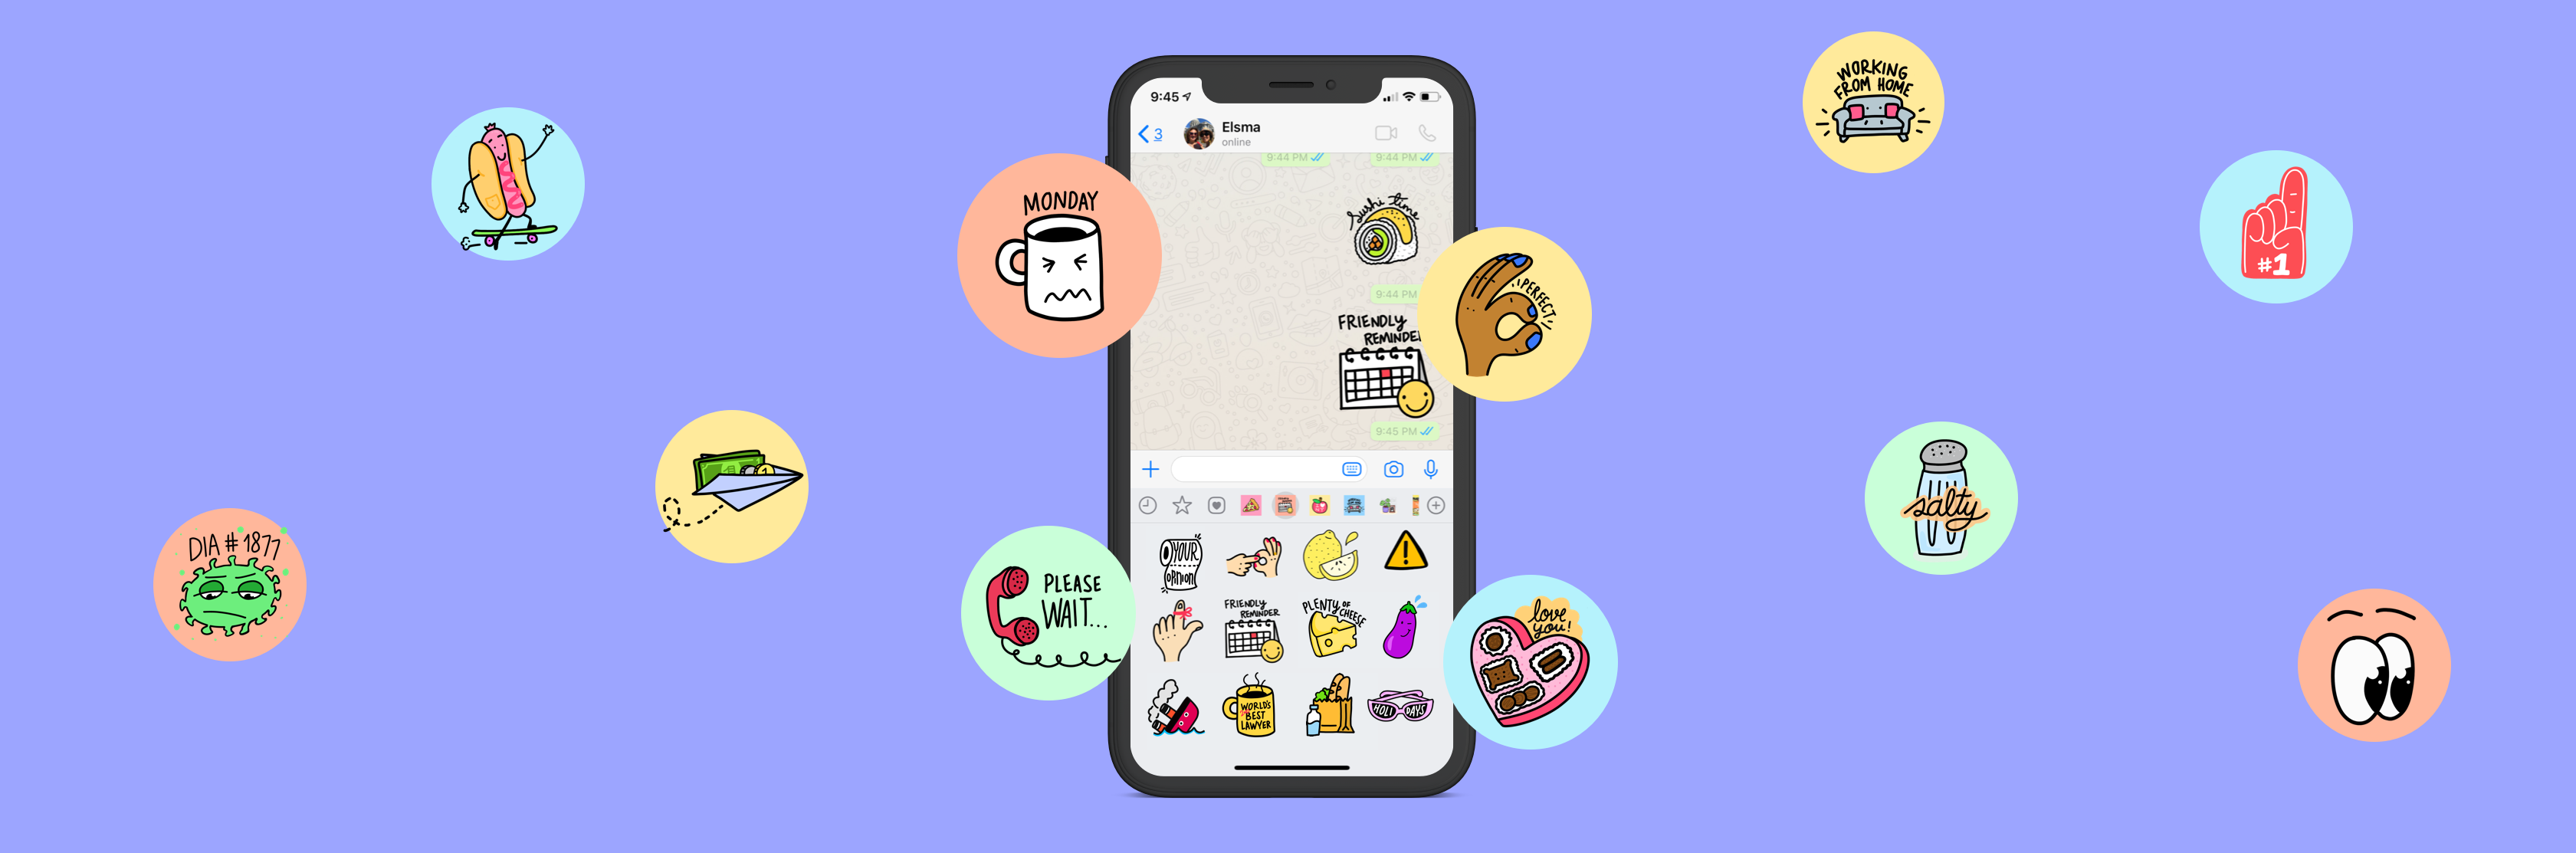 Stickers Chat 3